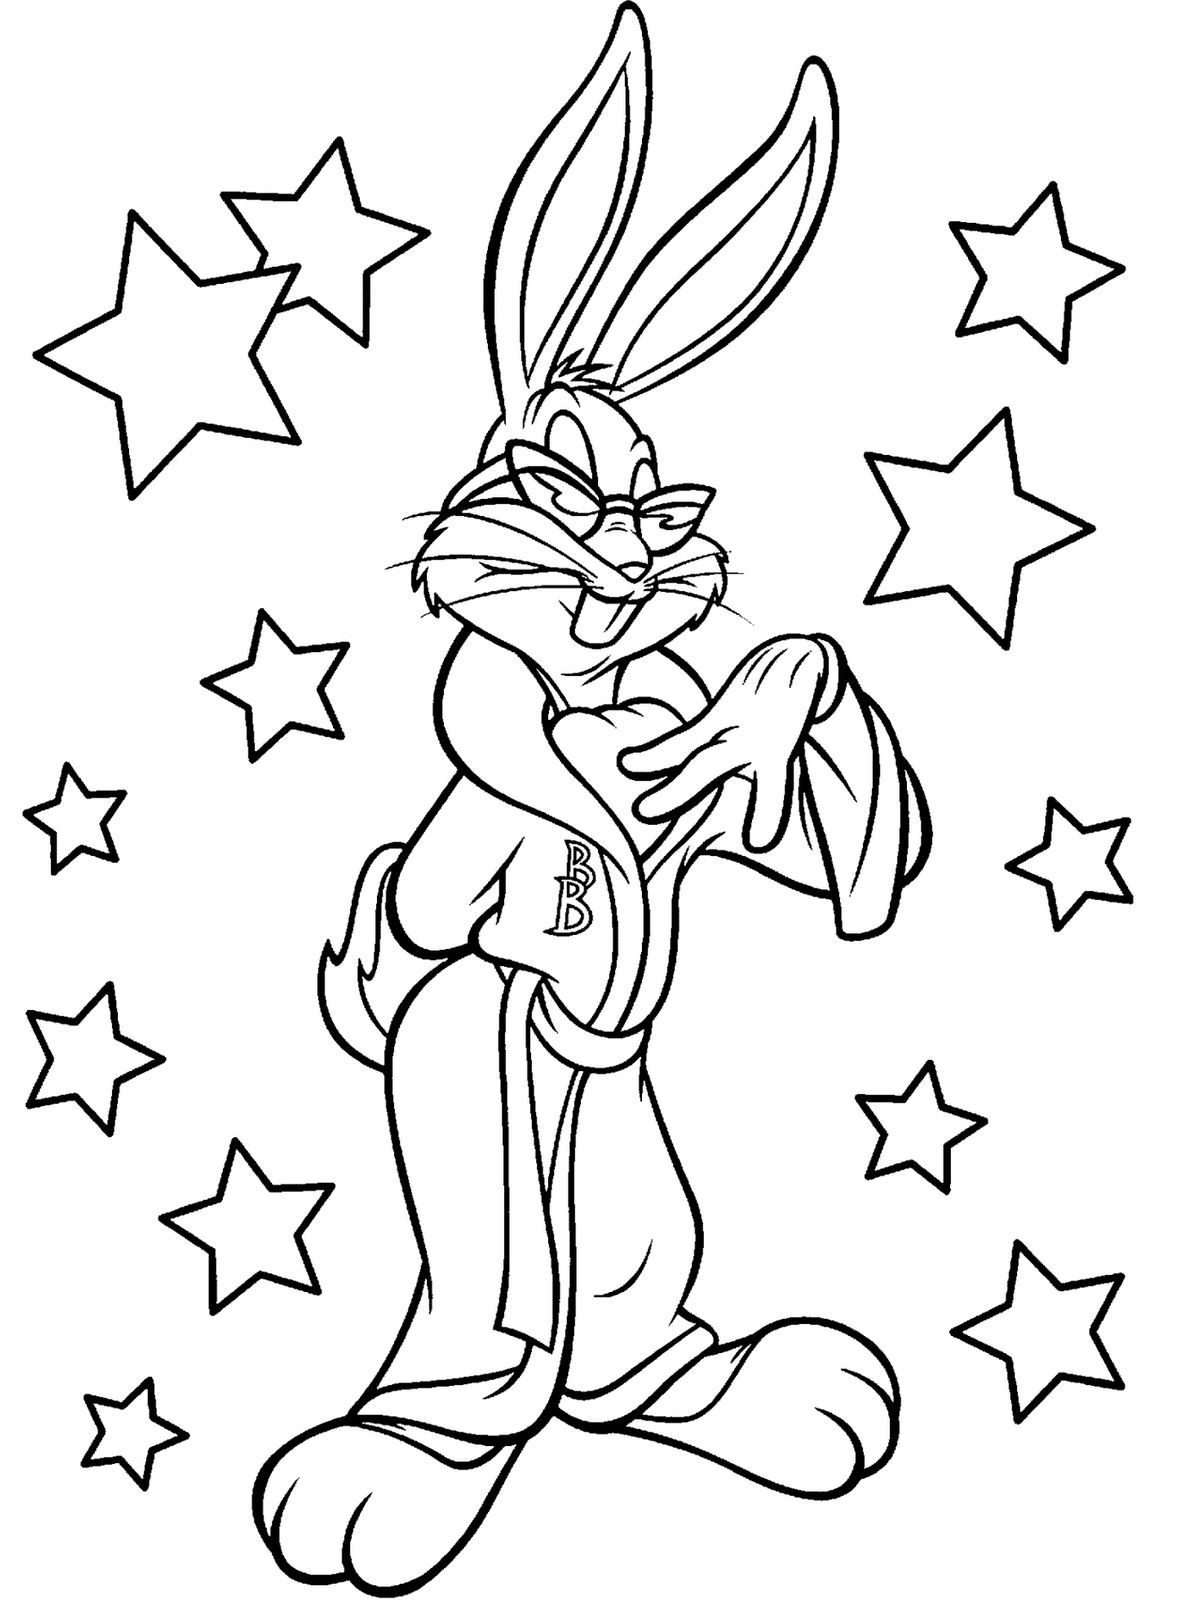 gangster bugs bunny coloring pages